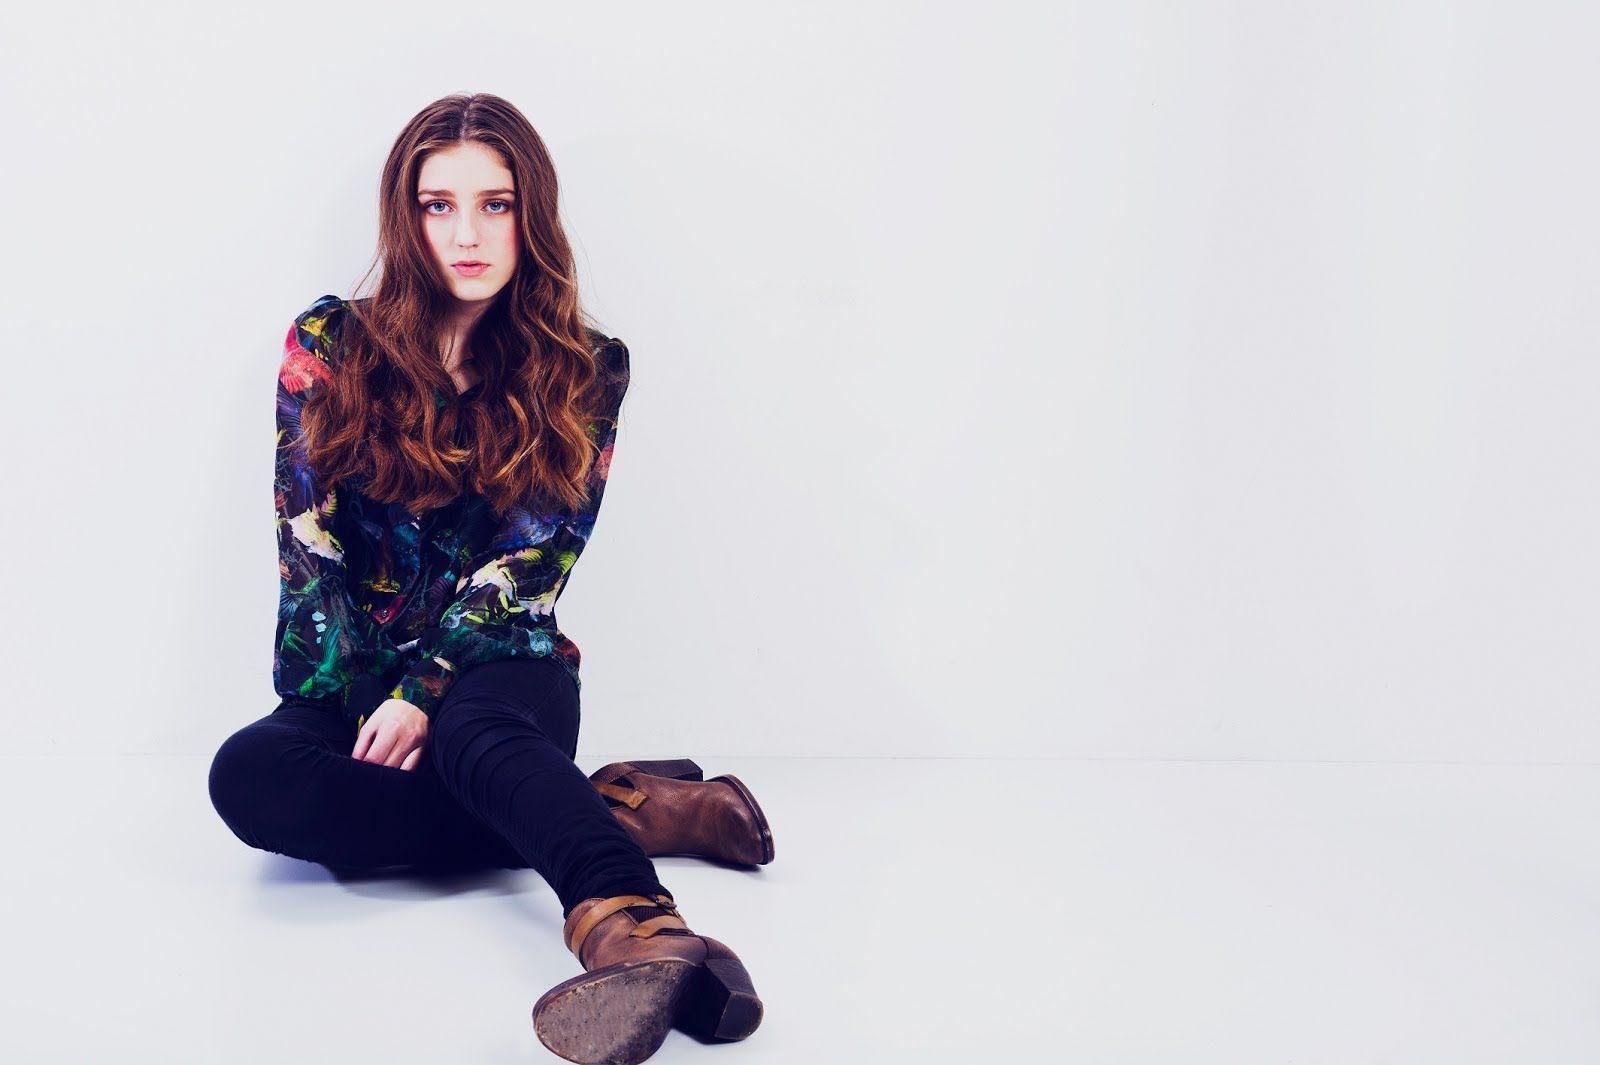 Birdy Releases Exclusive Australian Single "What You Want" + How